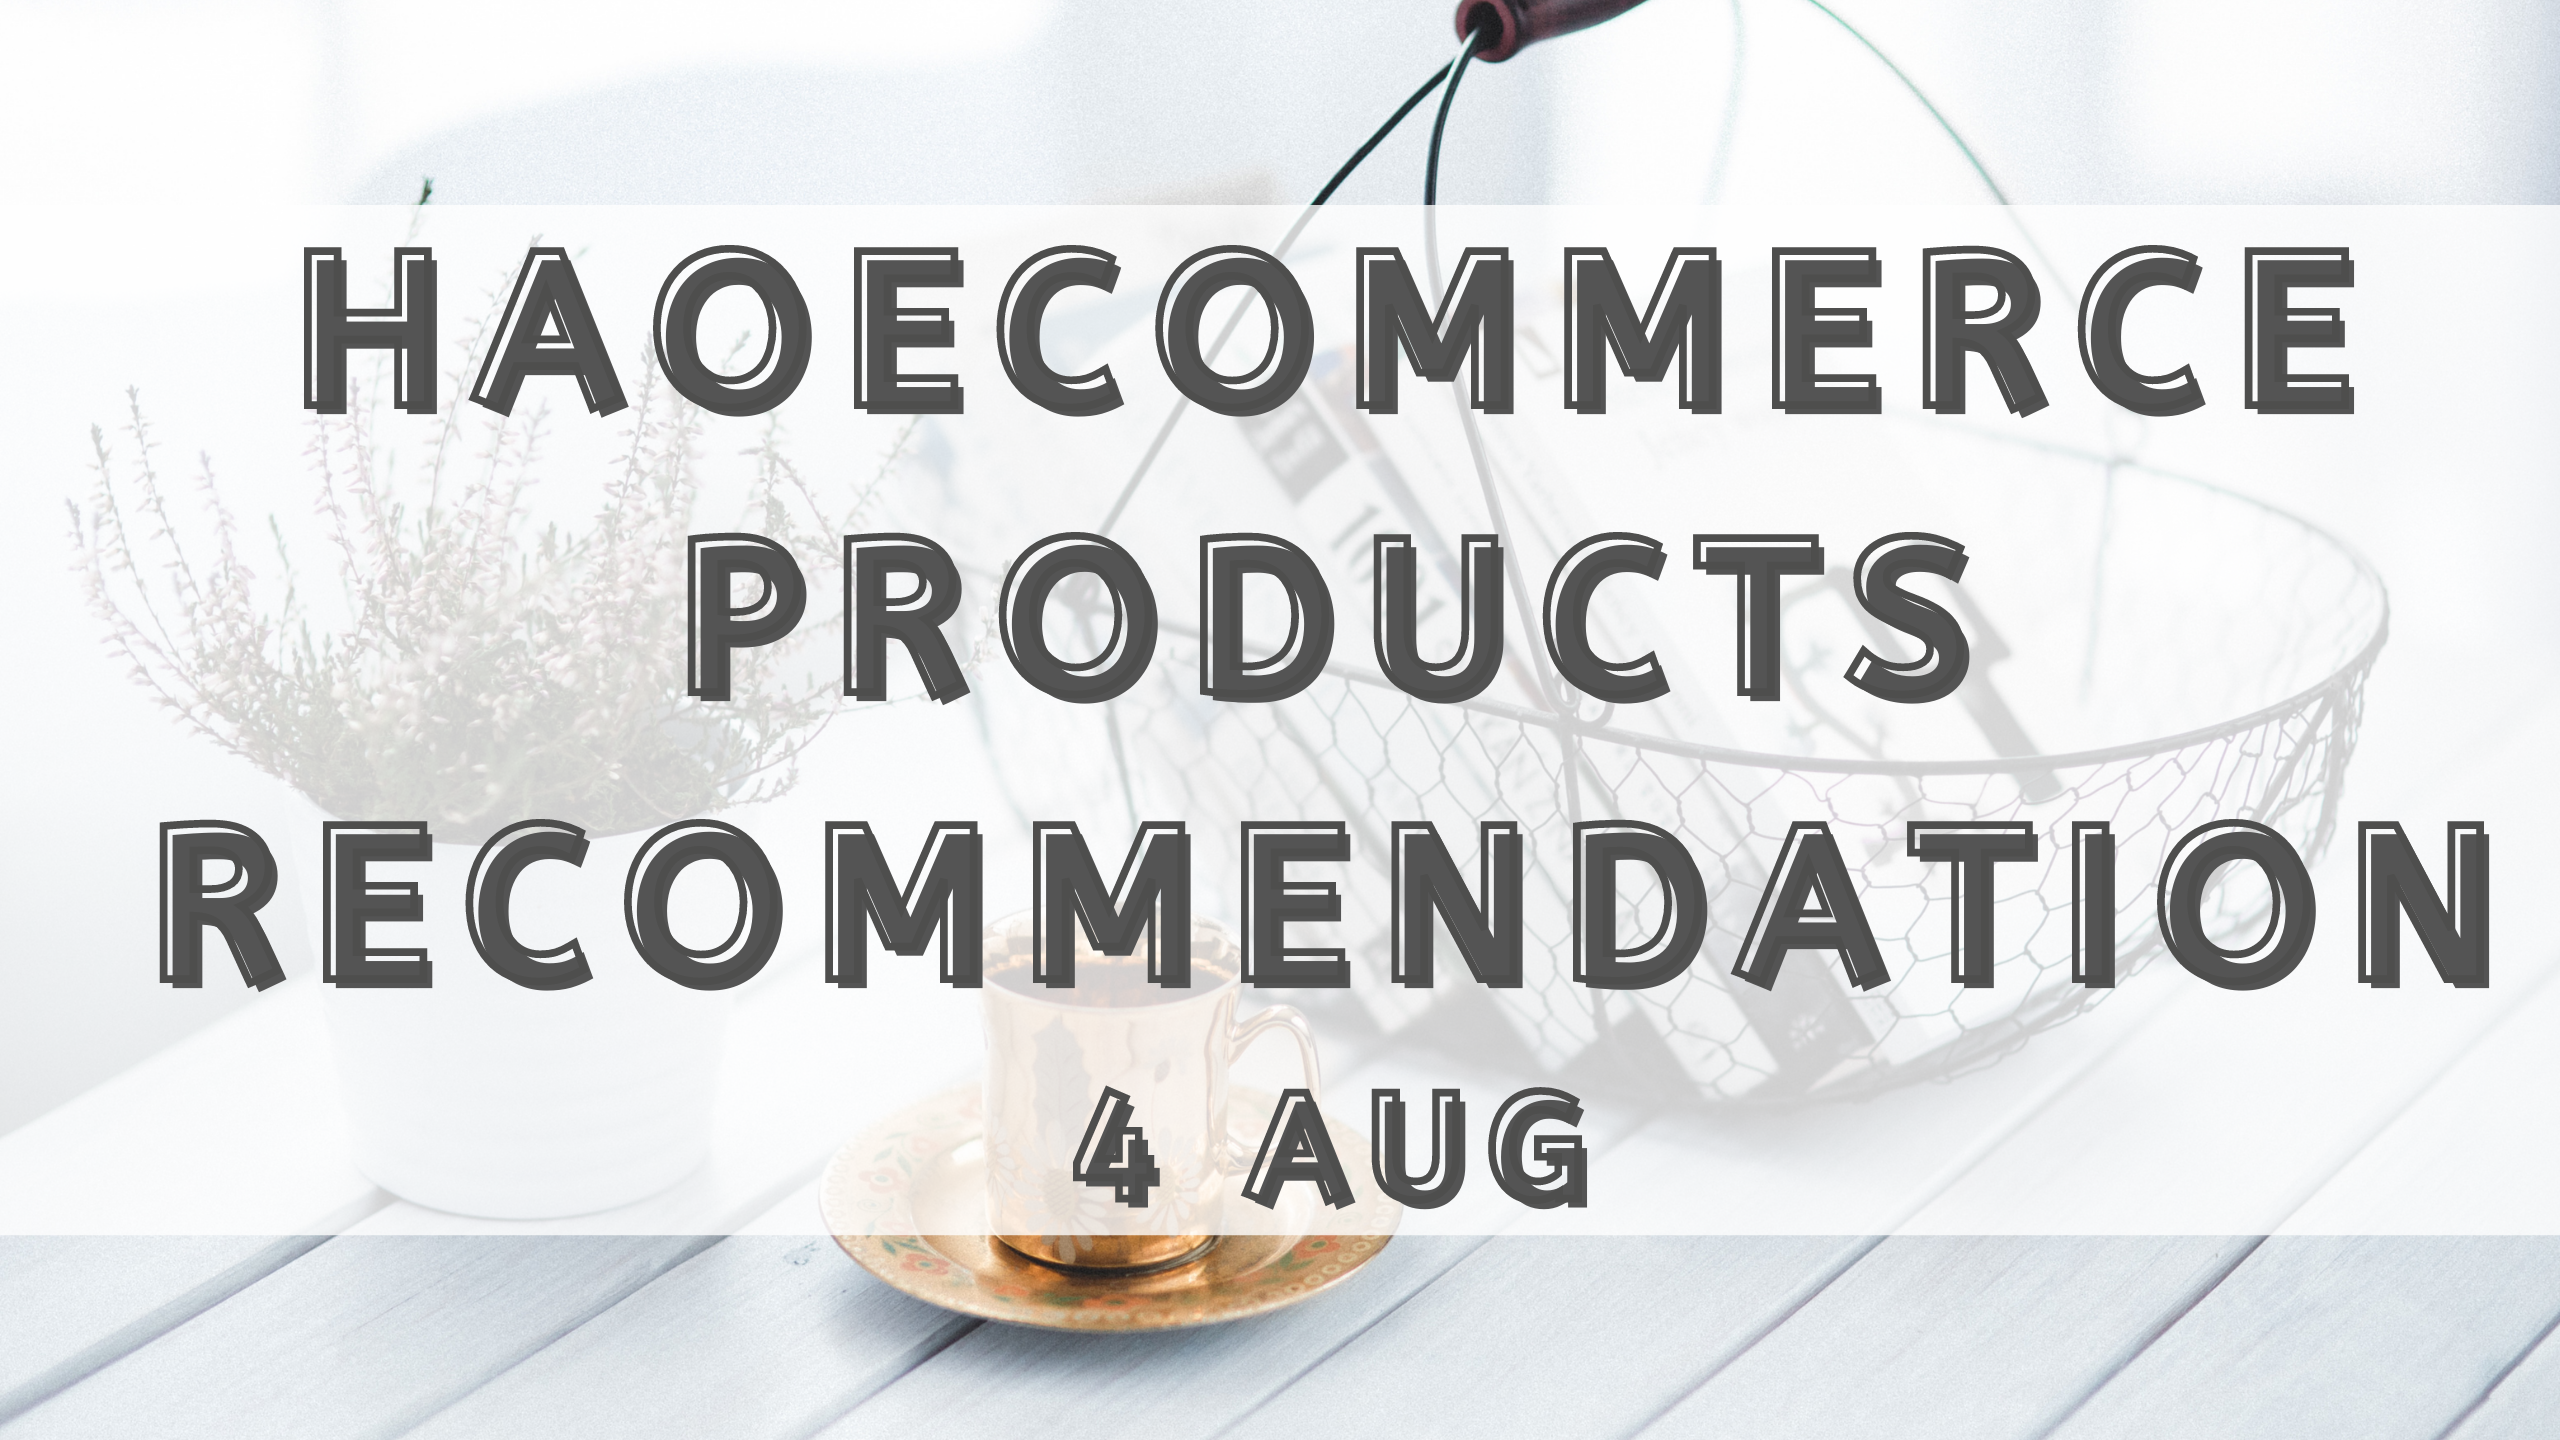 Products recommendation 4 August